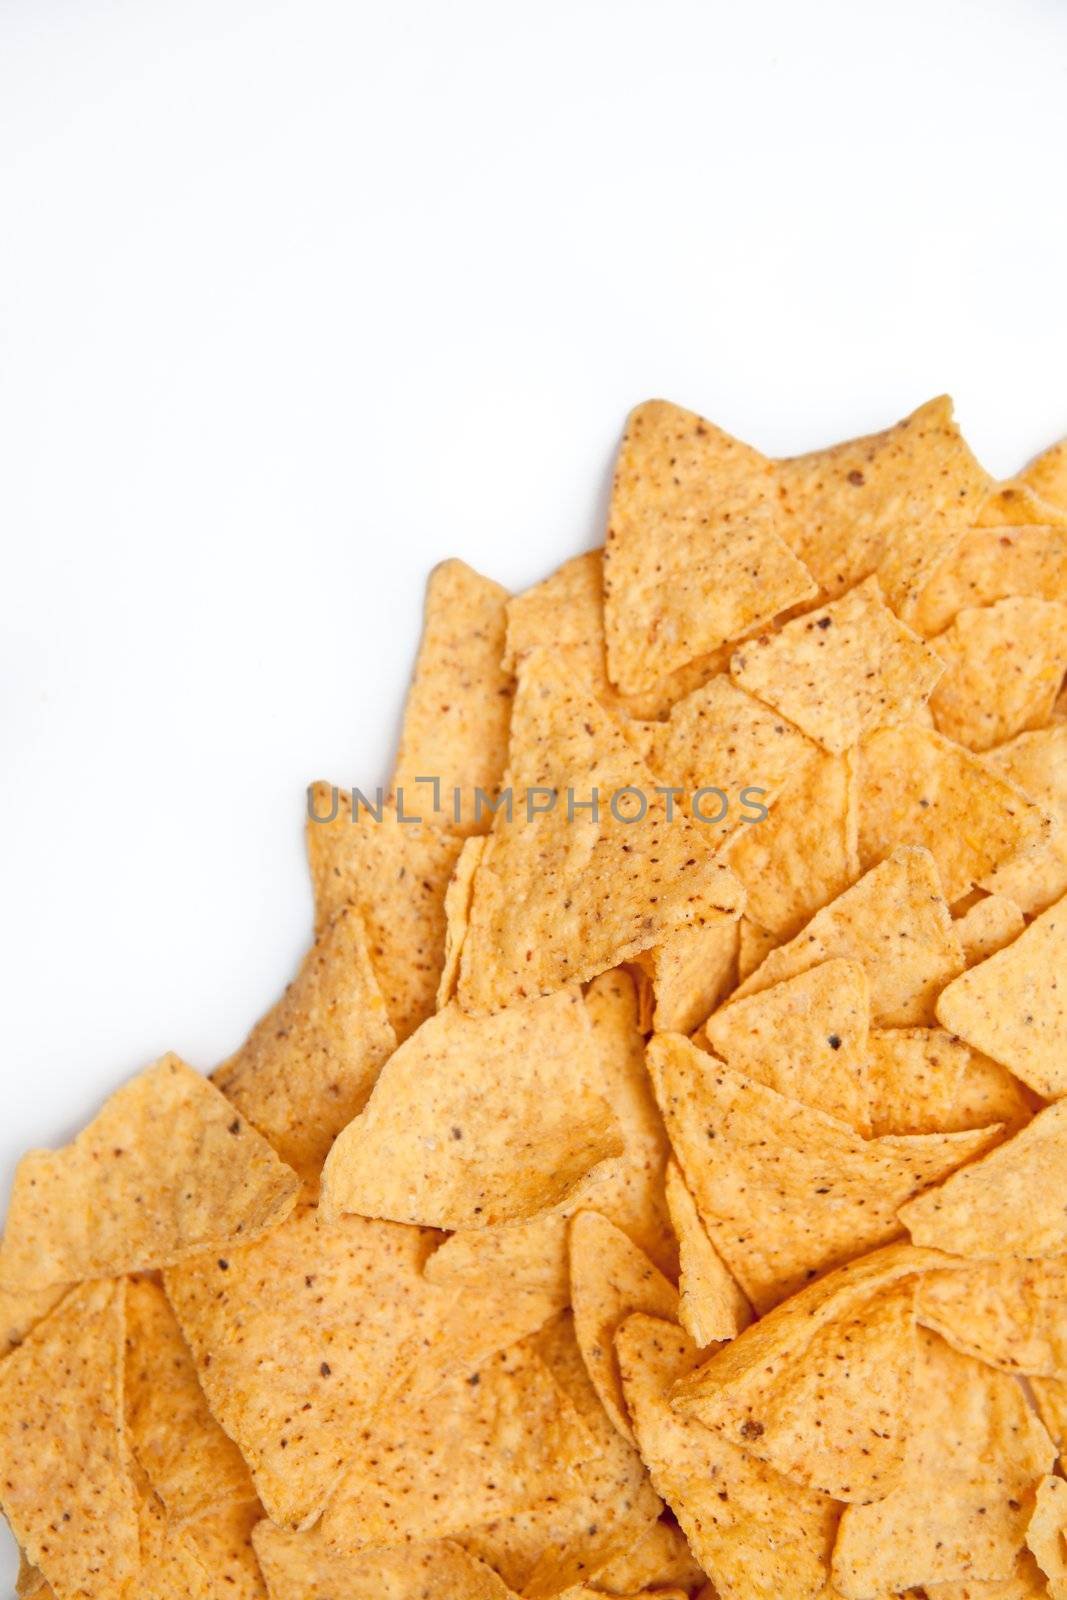 Nachos placed together against a white background